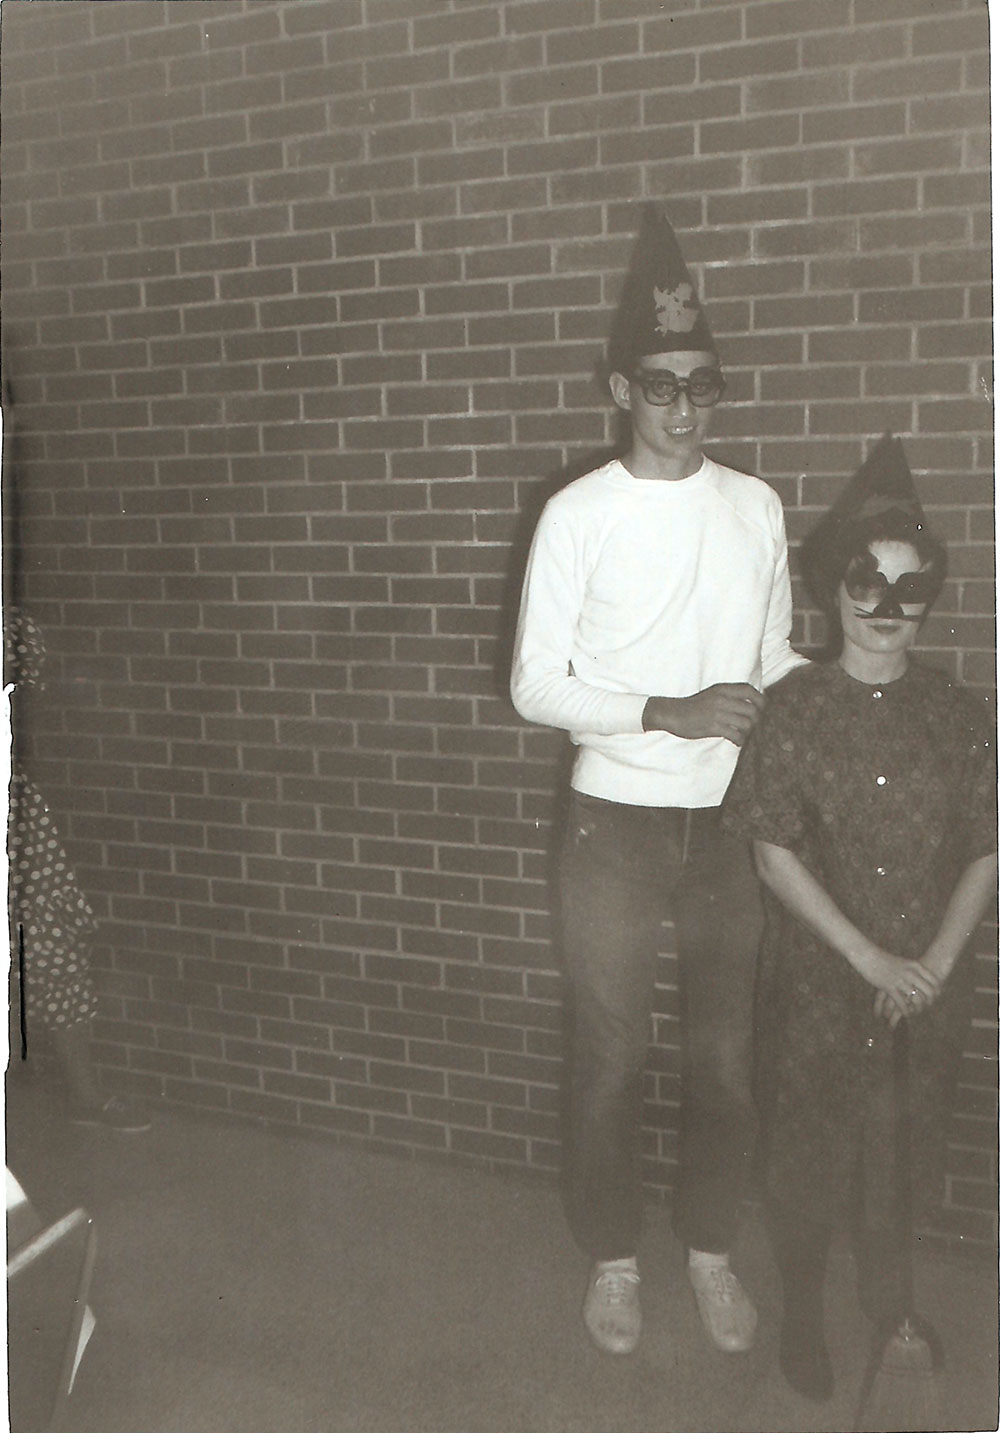 (FNB.2010.11.24) - Halloween Party, c. early 1960s